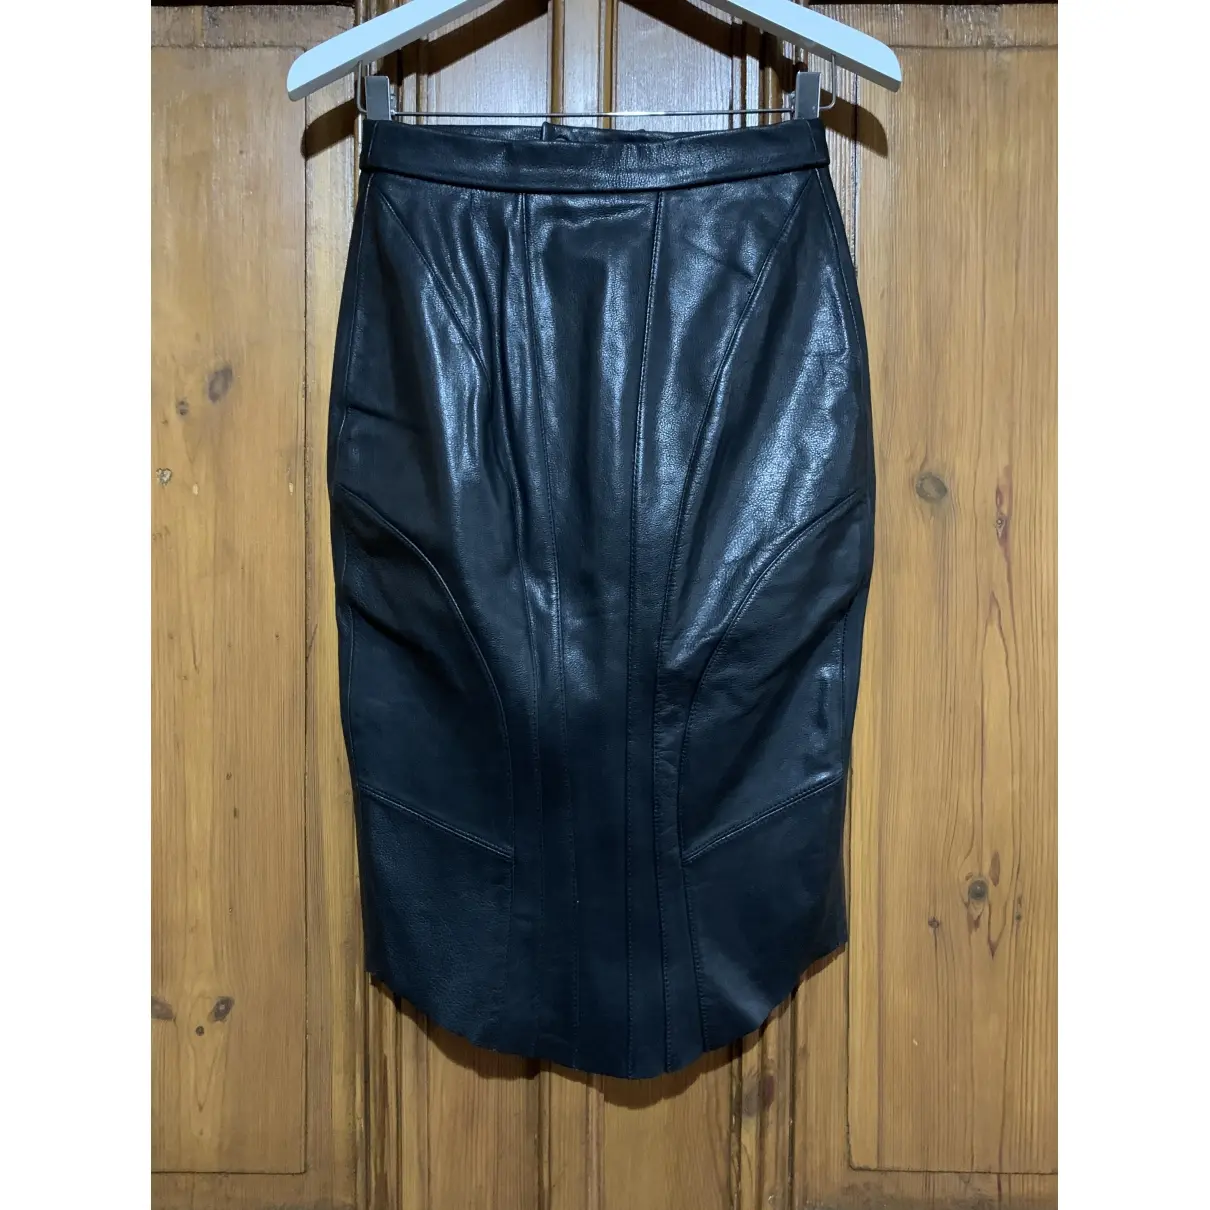 H&M Studio Leather mid-length skirt for sale